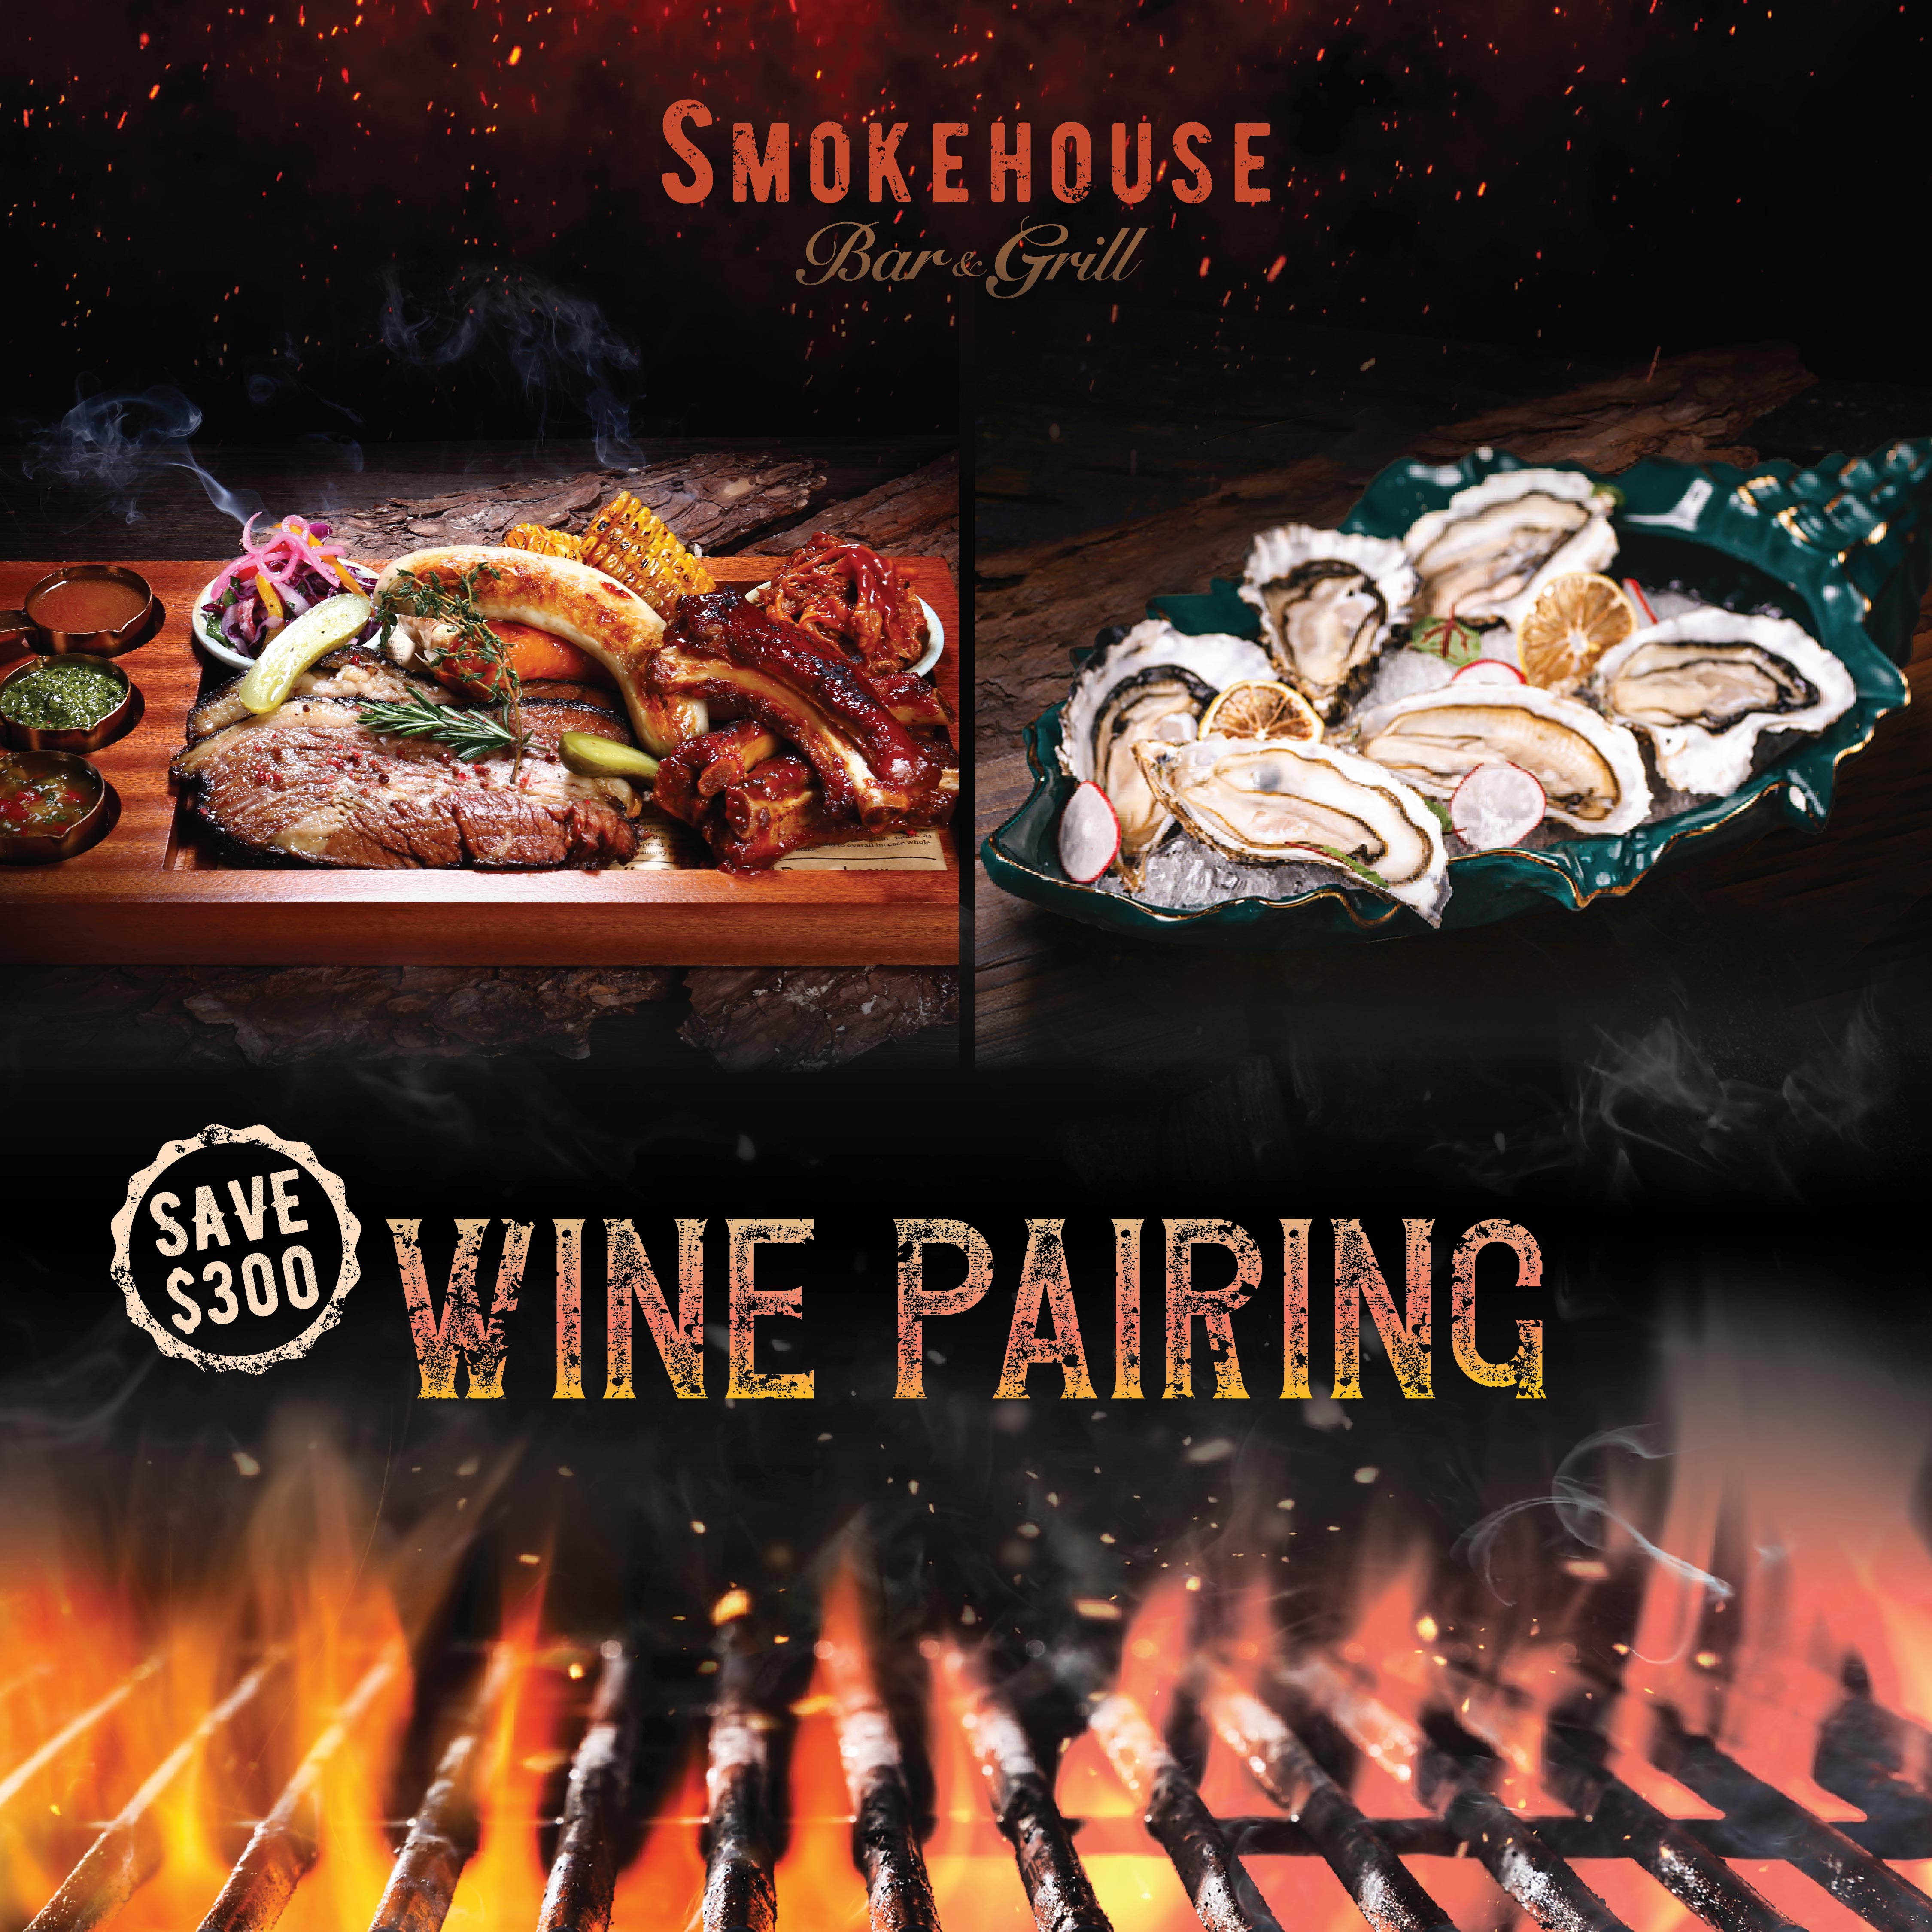 Join our Red Meat Carnival and White Seafood Megafest at Smokehouse